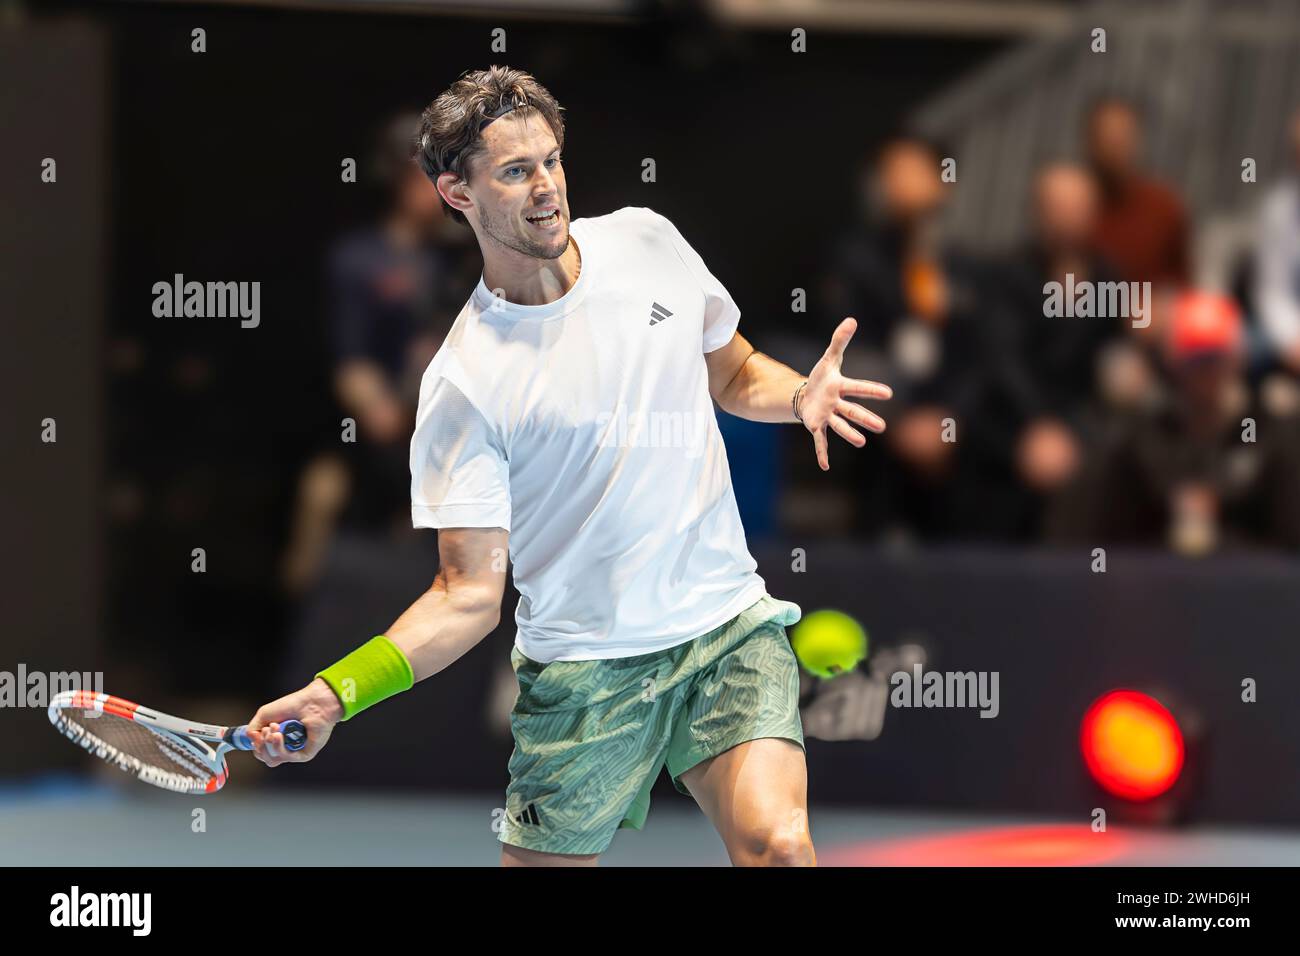 Oslo, Norway 09 February 2024  Dominic Thiem of Austria plays a forehand shot against Holger Rune of Denmark  during the Round Robin Ultimate Tennis Showdown tournament held at the Telenor Arena in Oslo, Norway credit: Nigel Waldron/Alamy Live News Stock Photo